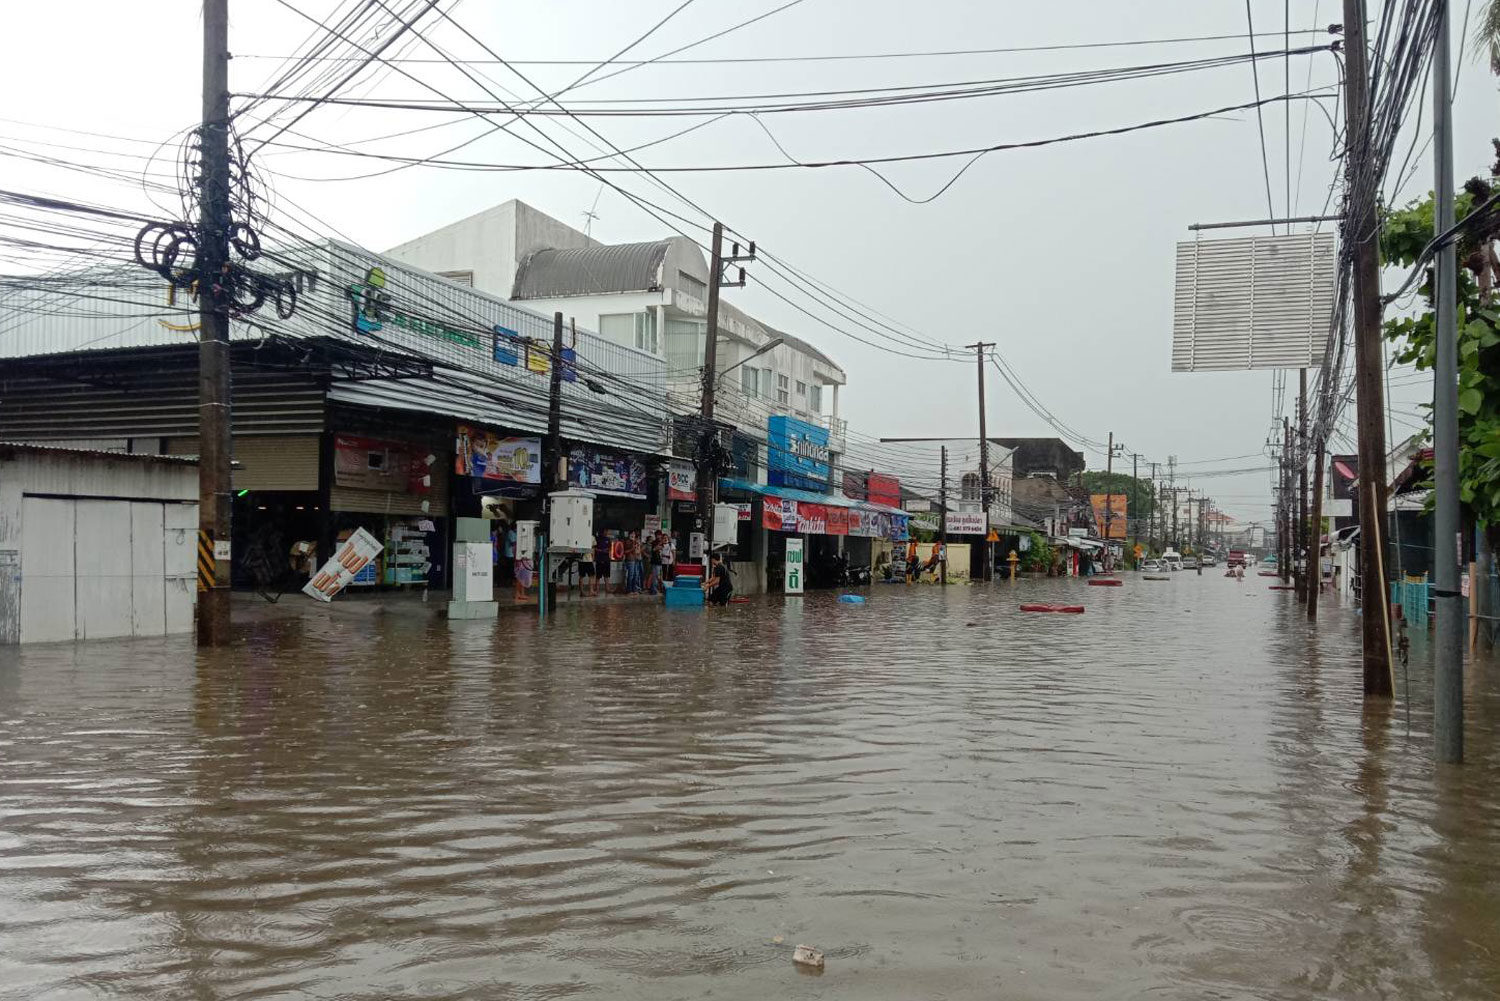 The Khraeng intersection on Sakdidet Road is flooded after two hours of heavy rain in Muang district of Phuket on Saturday morning.